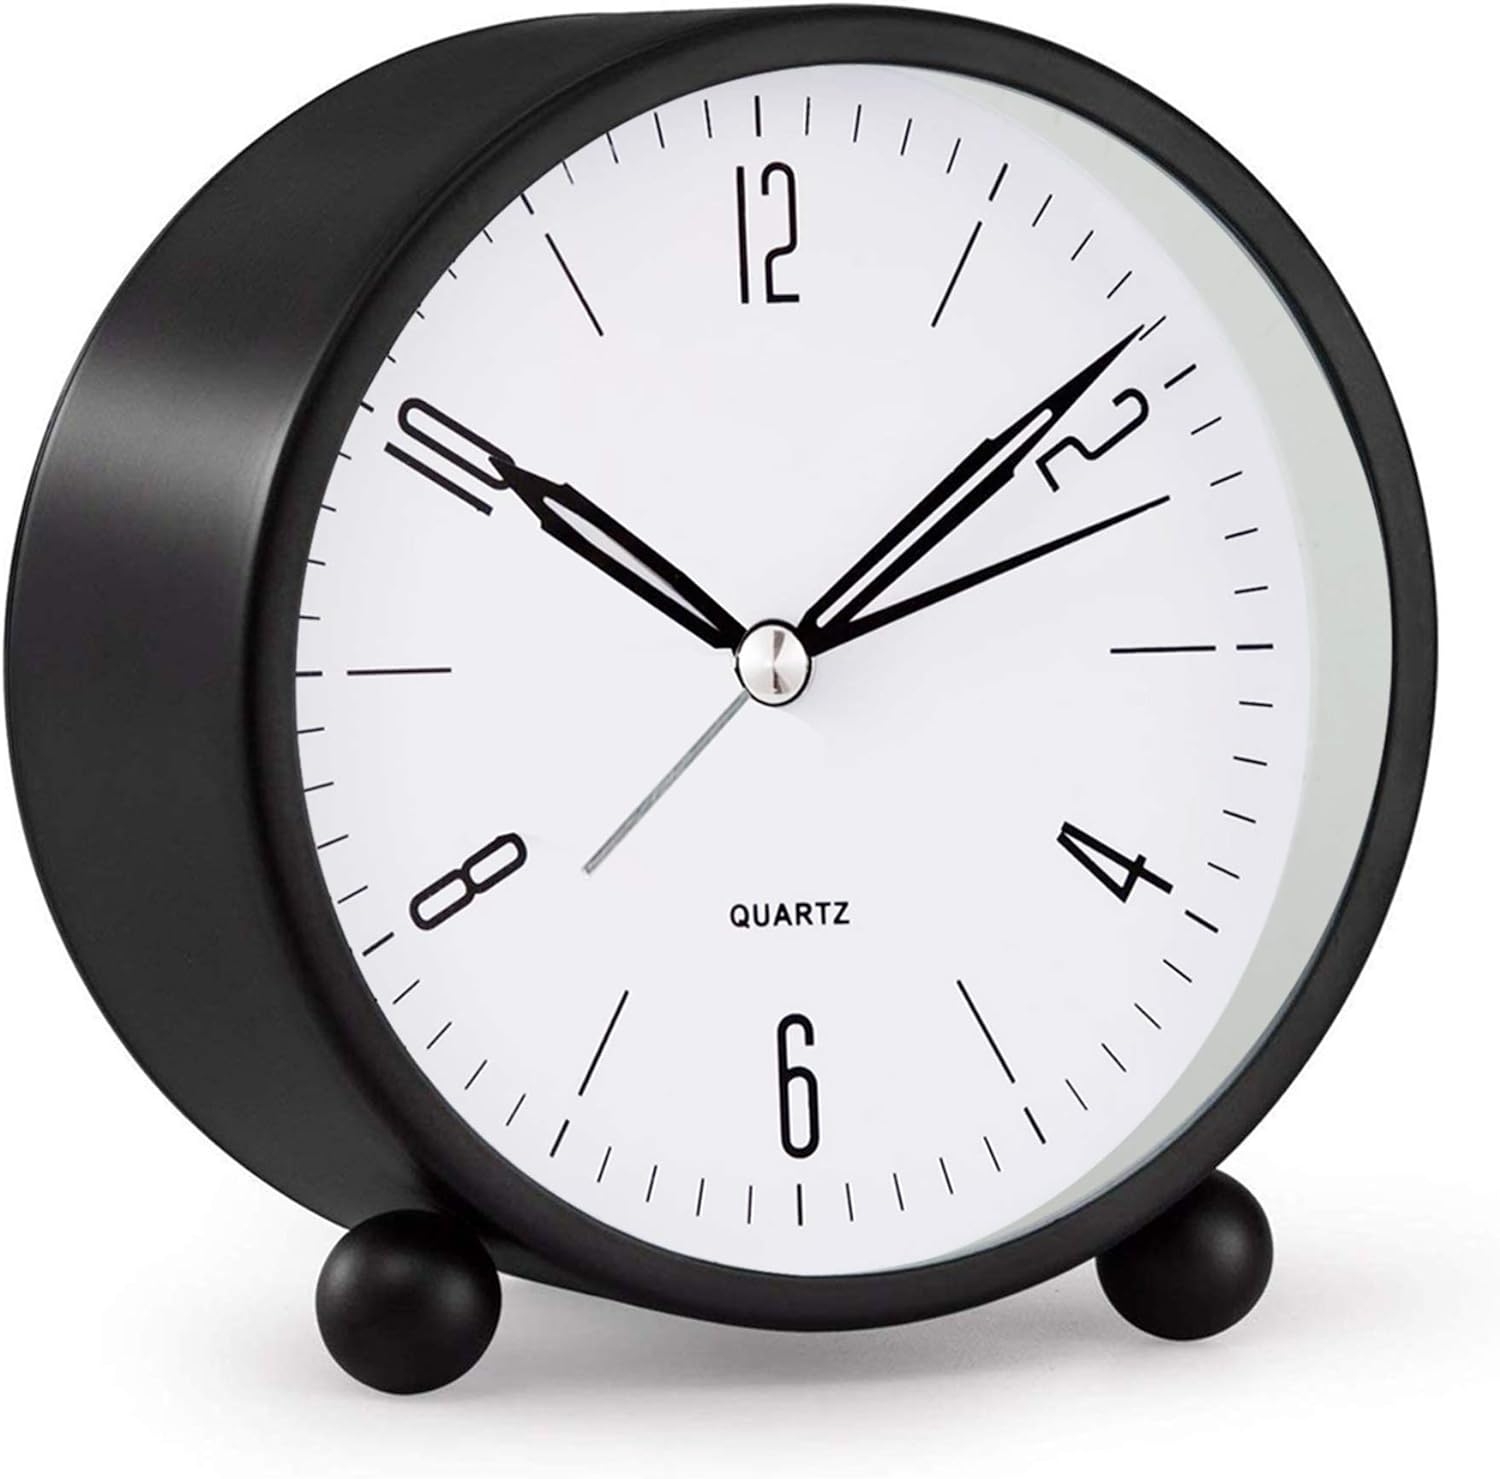 Analog Alarm Clock, 4 inch Super Silent Non Ticking Small Clock with Night Light, Battery Operated, Simply Design, for Bedroon, Bedside, Desk, Black